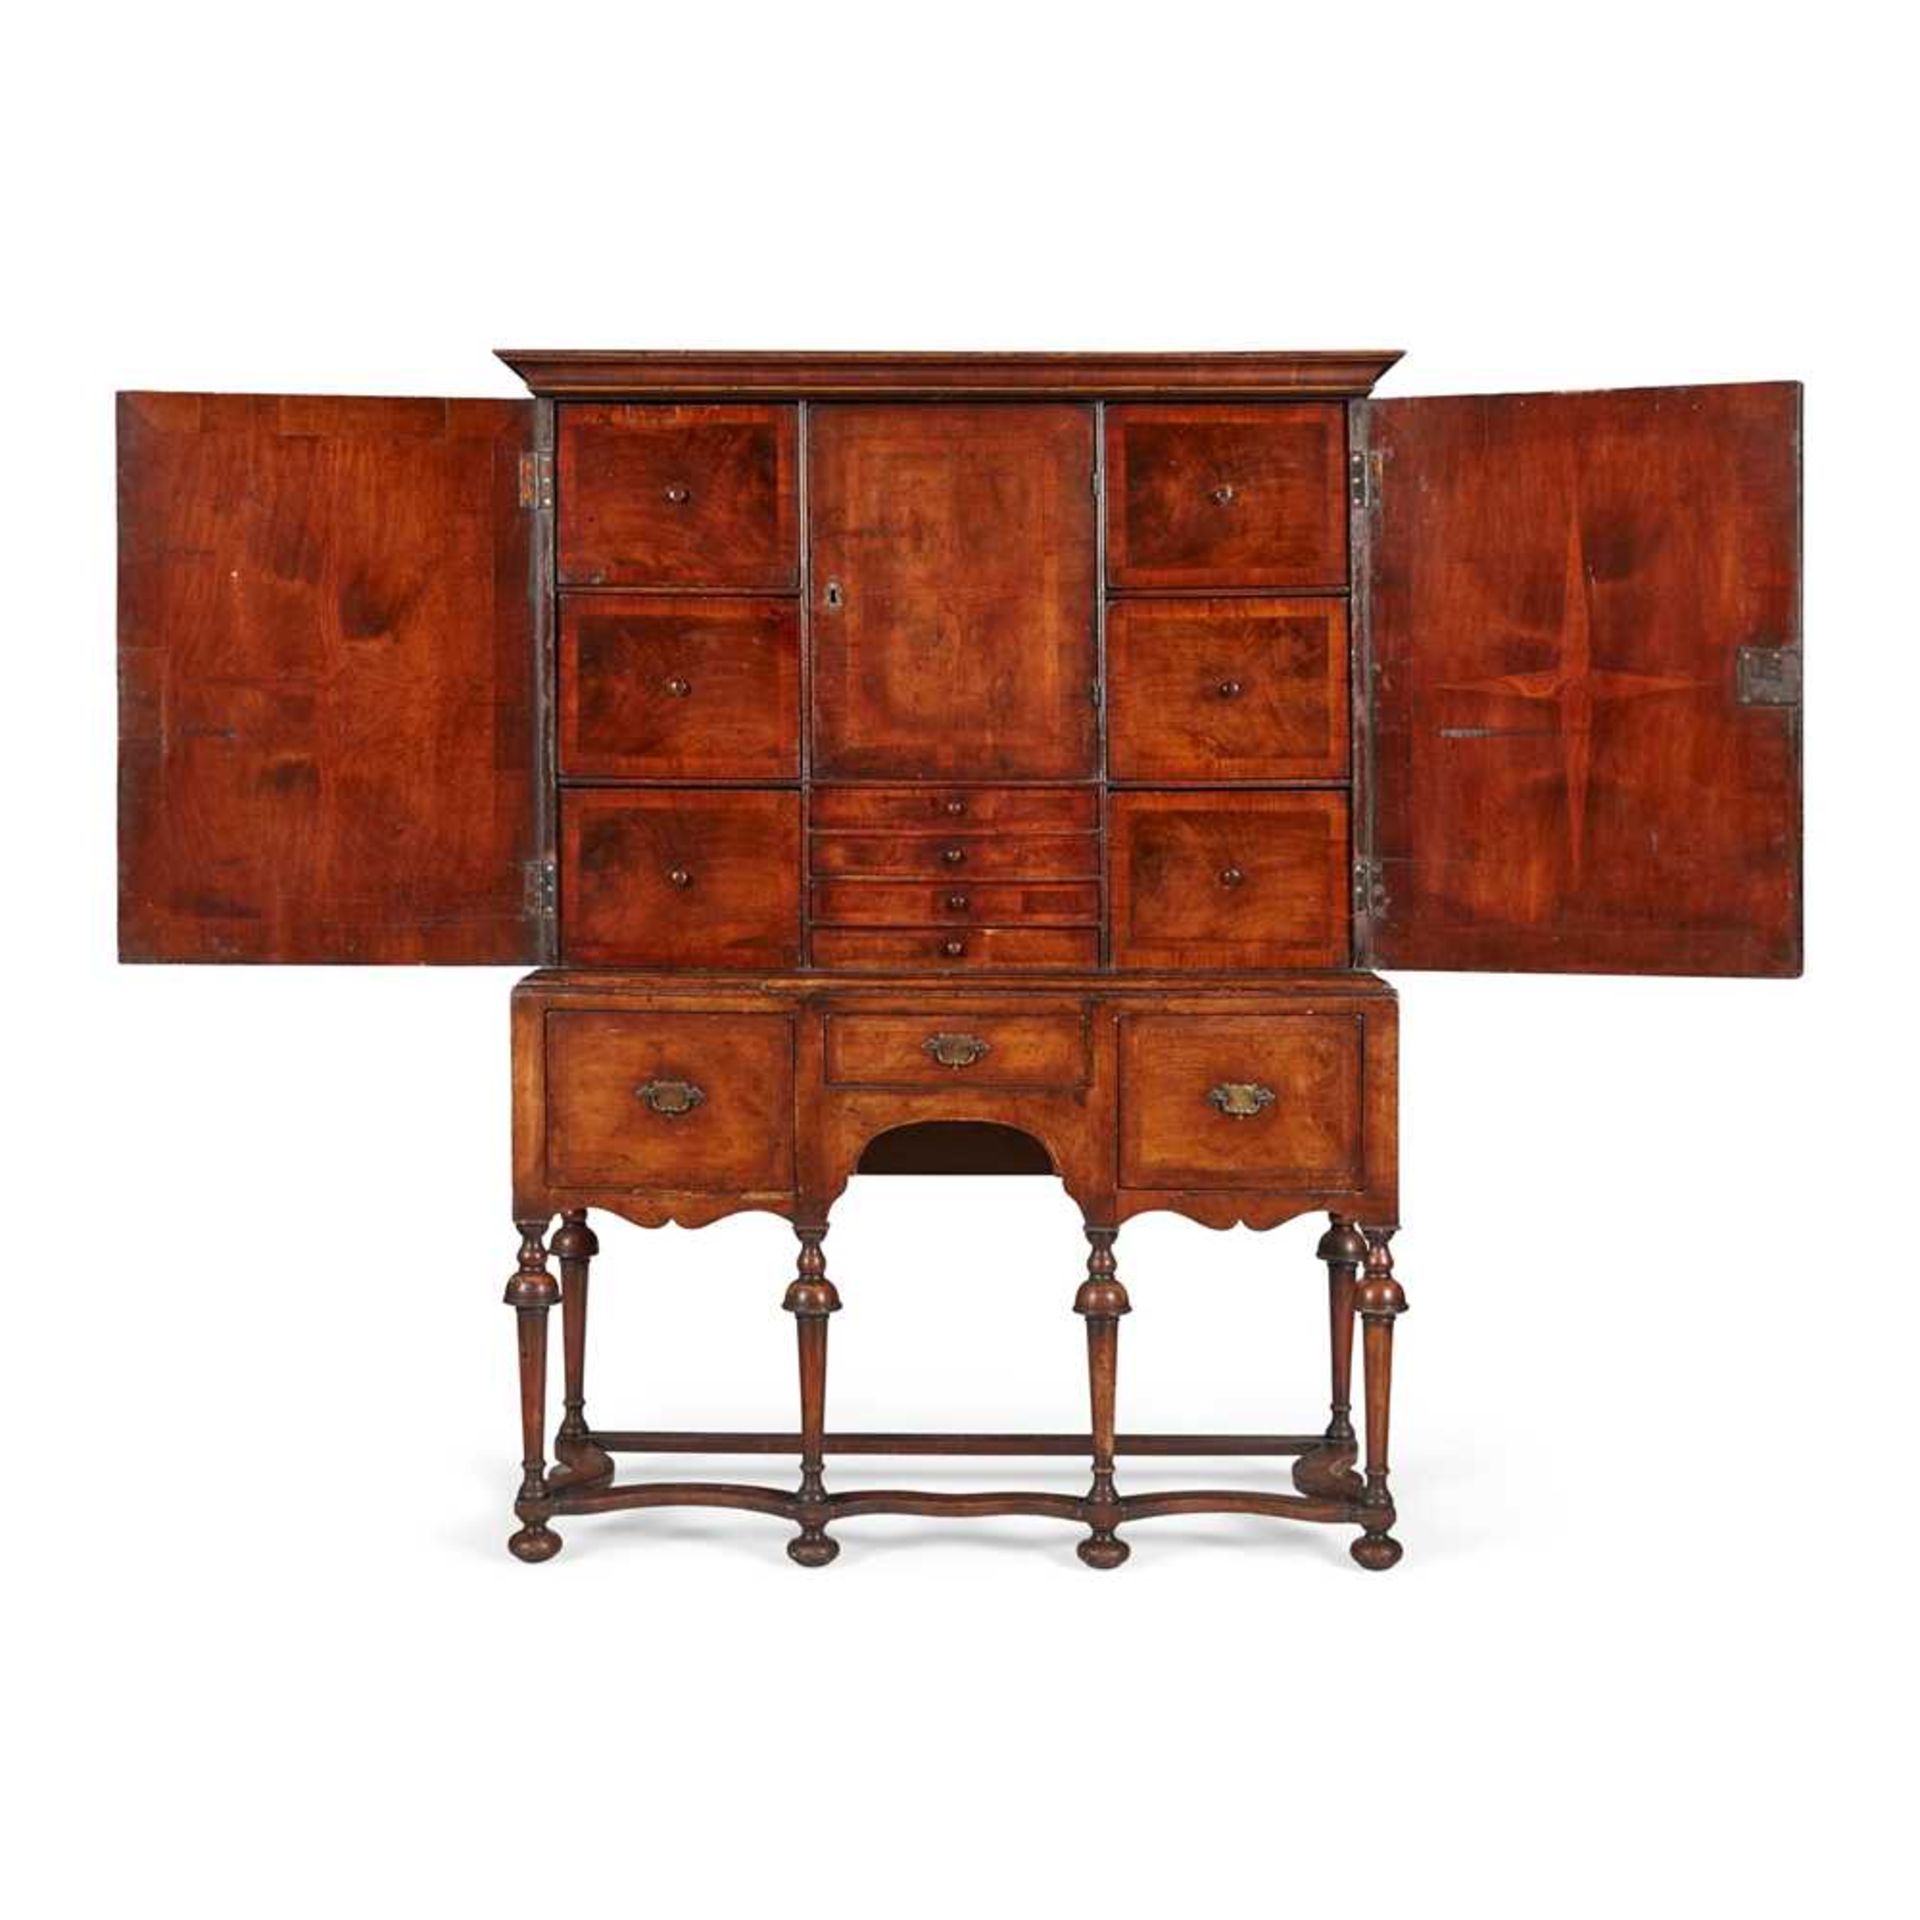 QUEEN ANNE STYLE WALNUT CABINET-ON-STAND 19TH CENTURY - Image 2 of 2